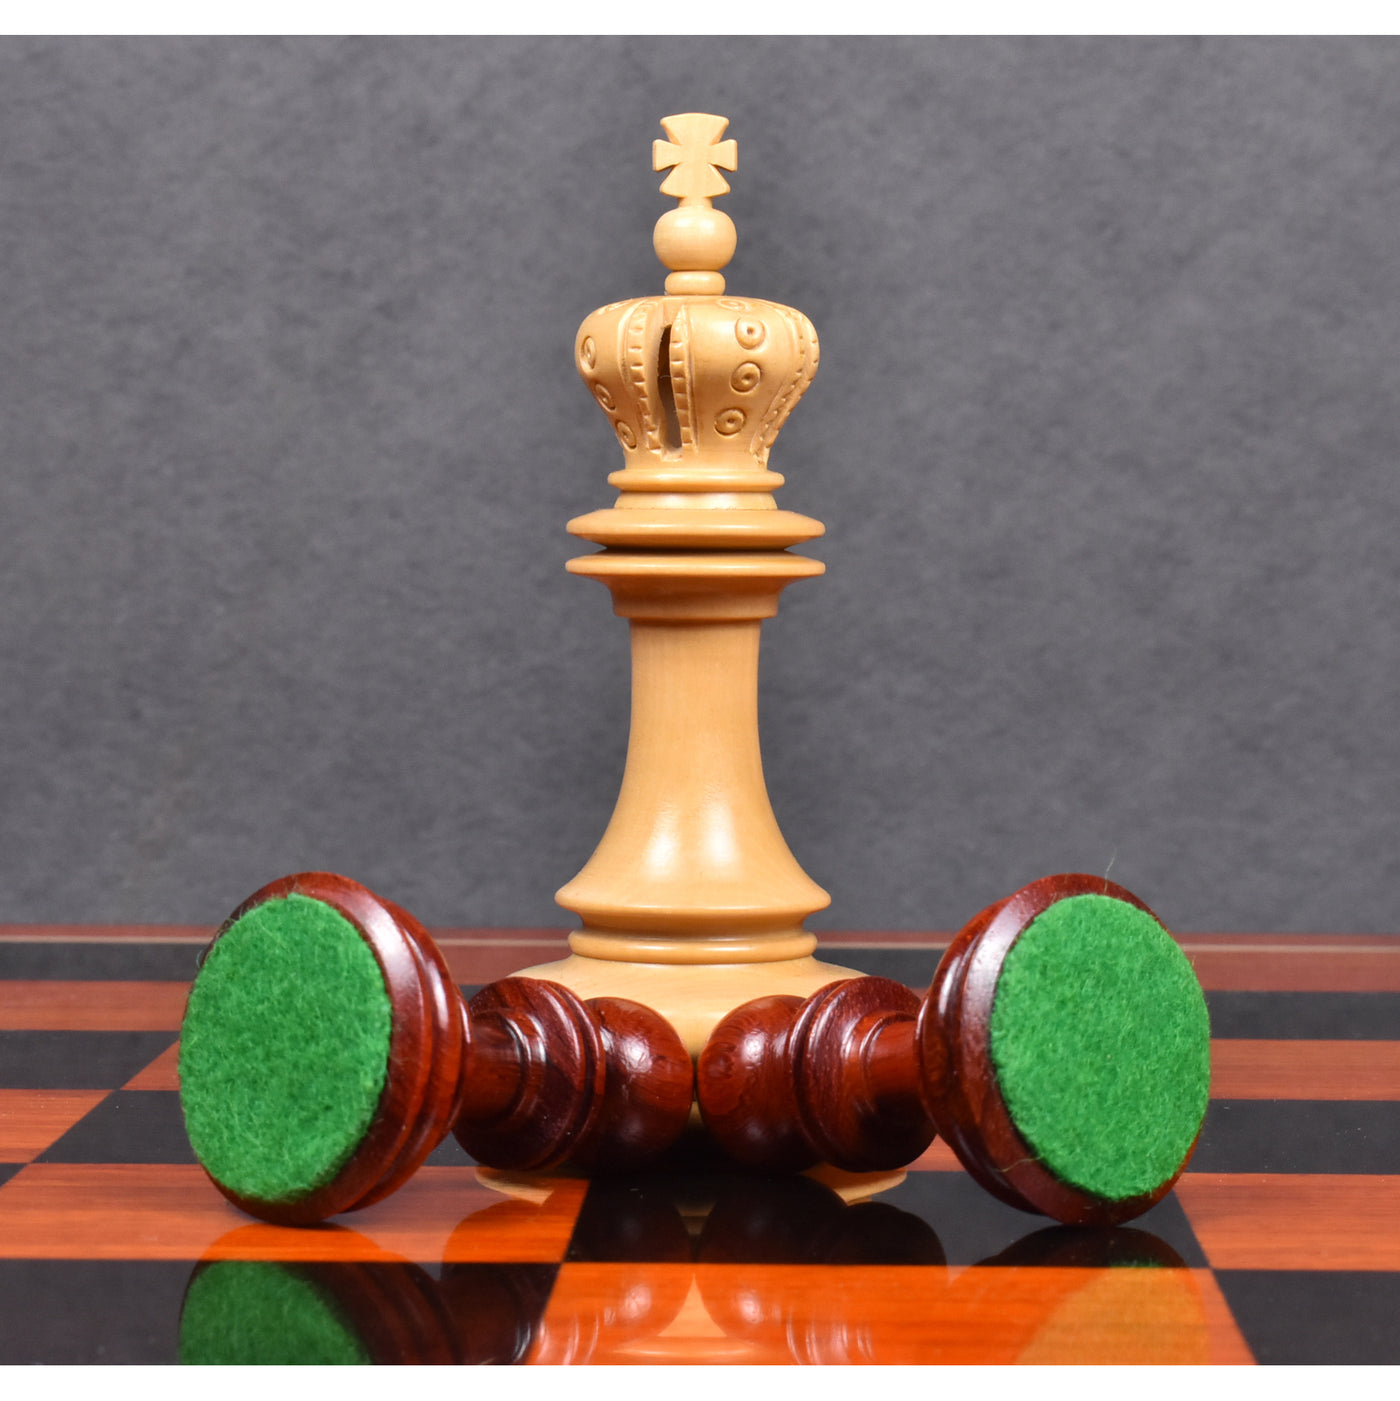 Slightly Imperfect 4.5″ Carvers’ Art Luxury Chess Pieces Only Set